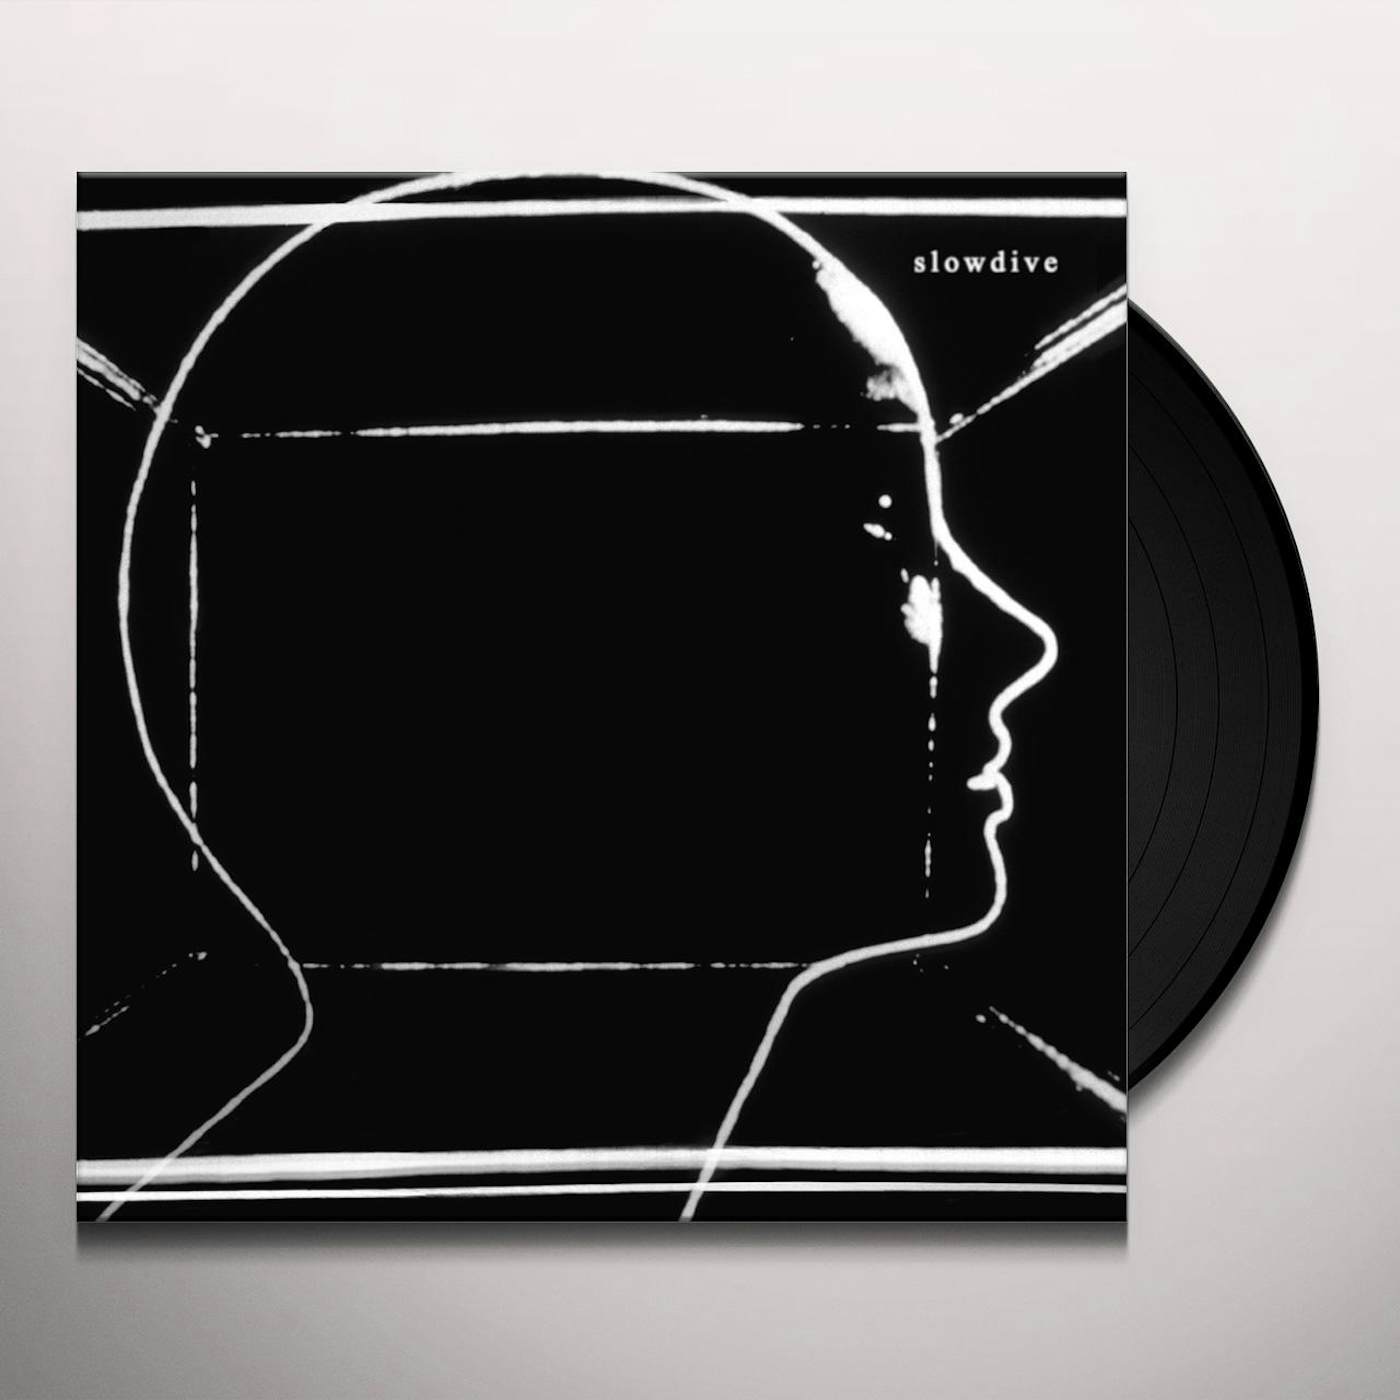 Slowdive - everything is alive (Crystal Clear Vinyl)